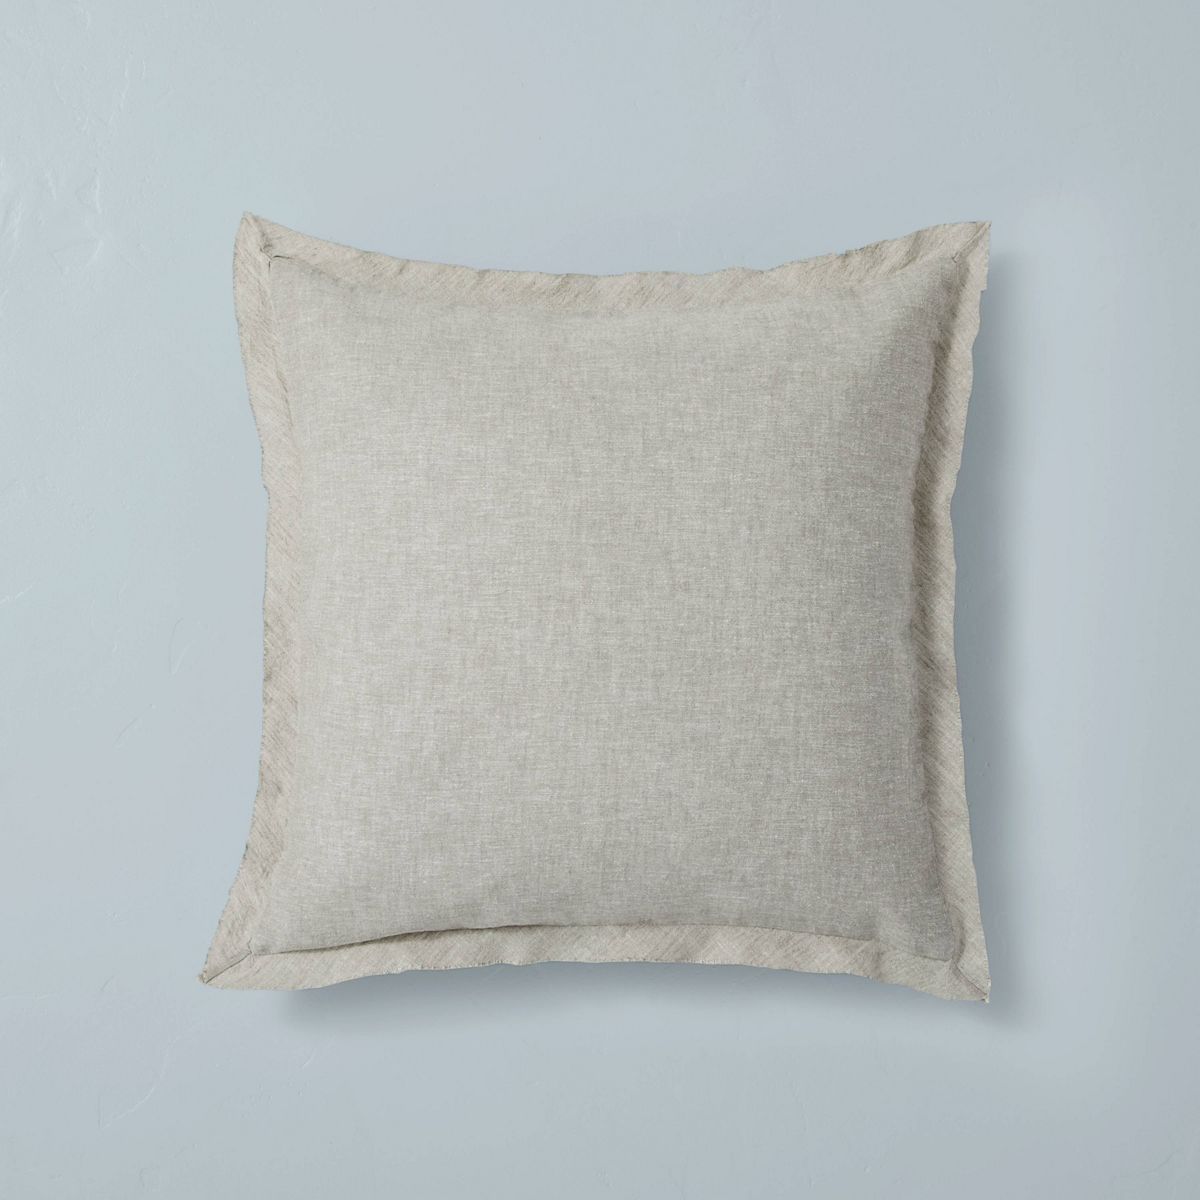 18"x18" Linen Blend Accent Pillow Sham - Hearth & Hand™ with Magnolia | Target